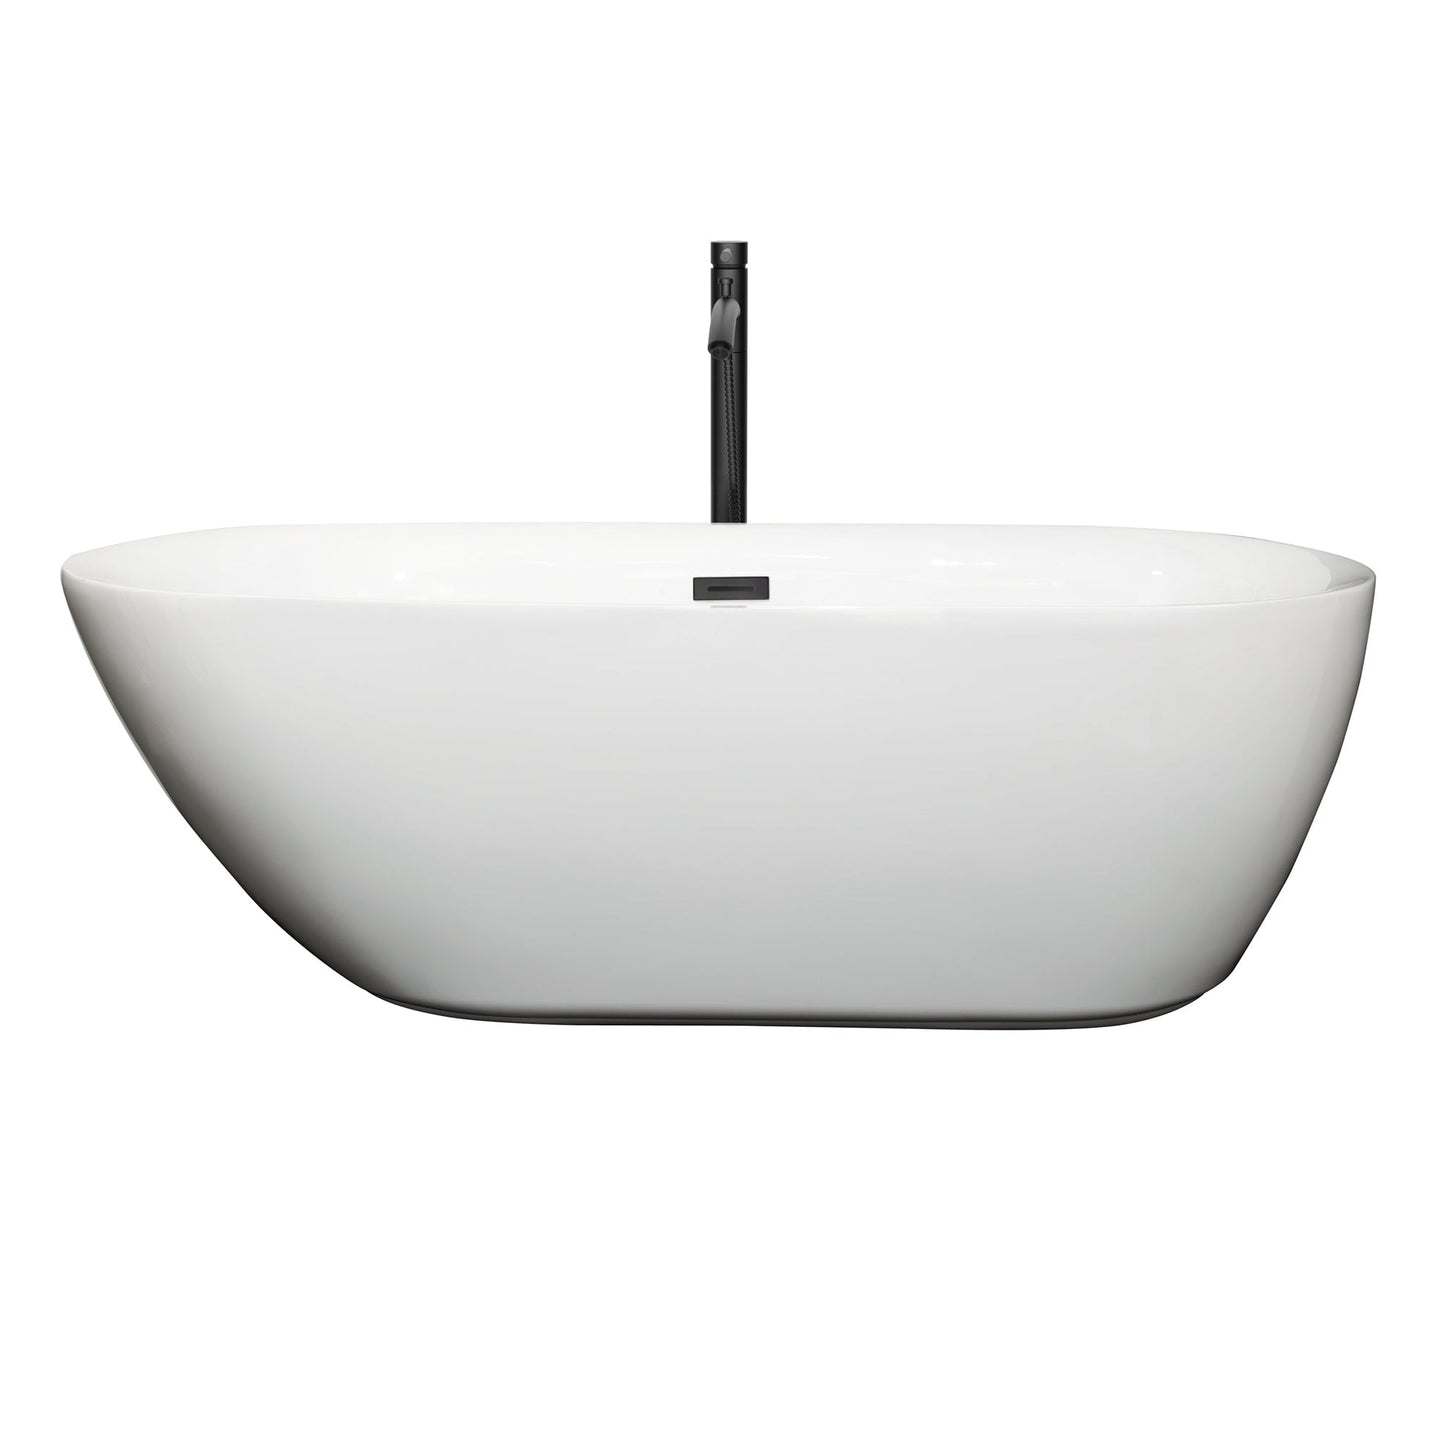 Wyndham Collection Melissa 65" Freestanding Bathtub in White With Floor Mounted Faucet, Drain and Overflow Trim in Matte Black